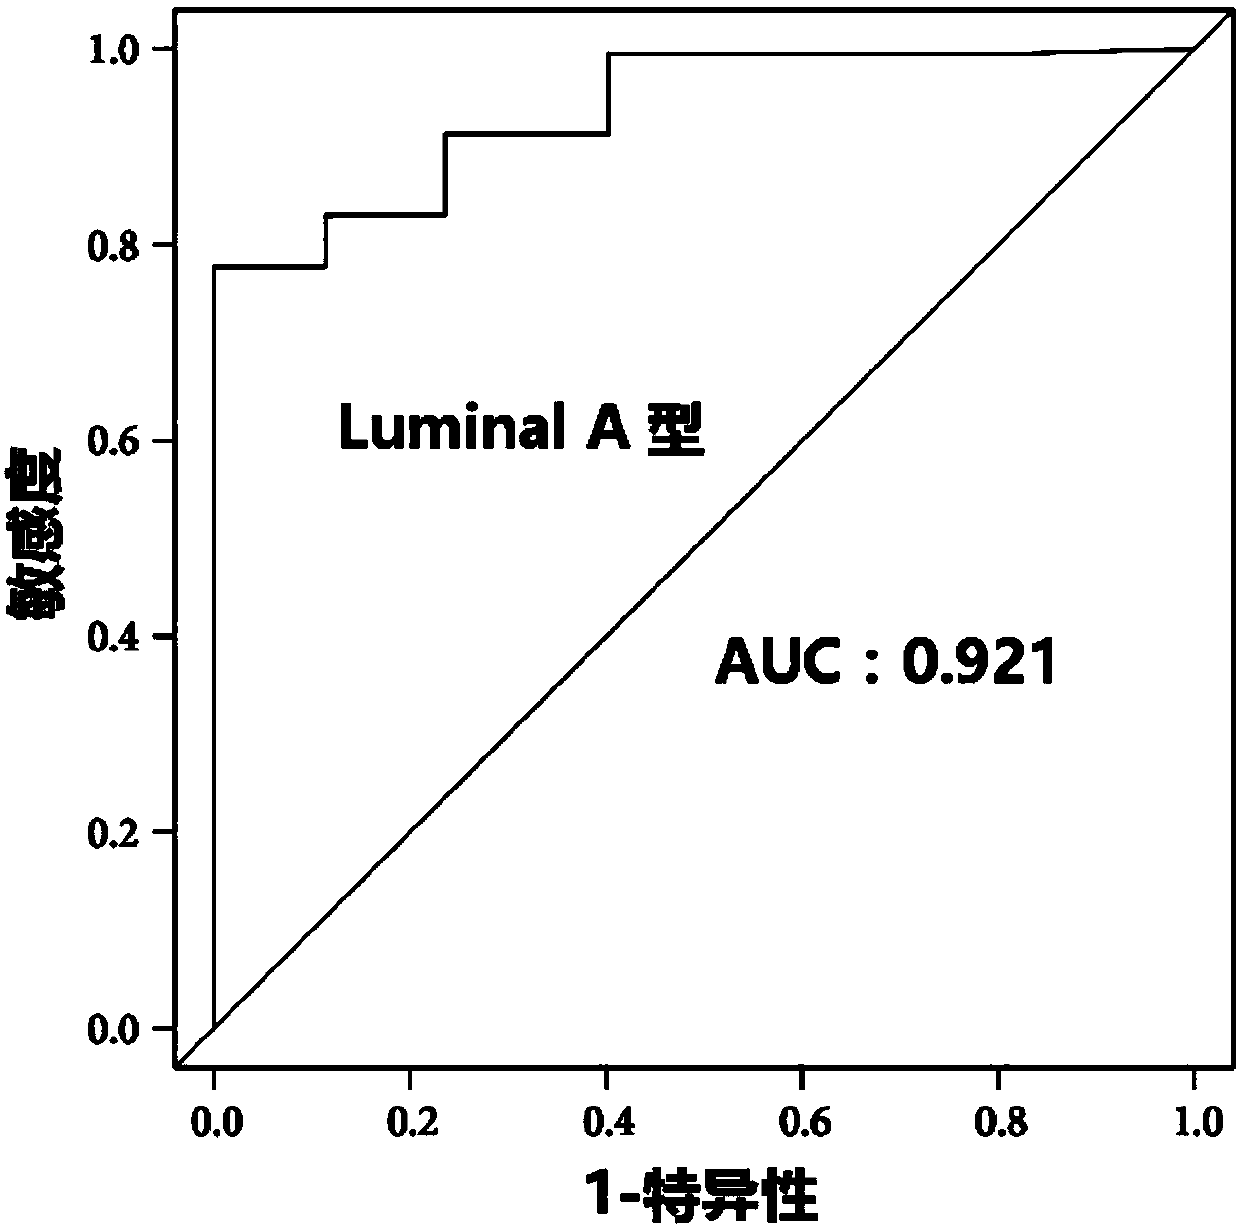 lncRNA composition and application thereof in preparation of kit for diagnostic prognostics of Luminal B breast cancer bone metastasis